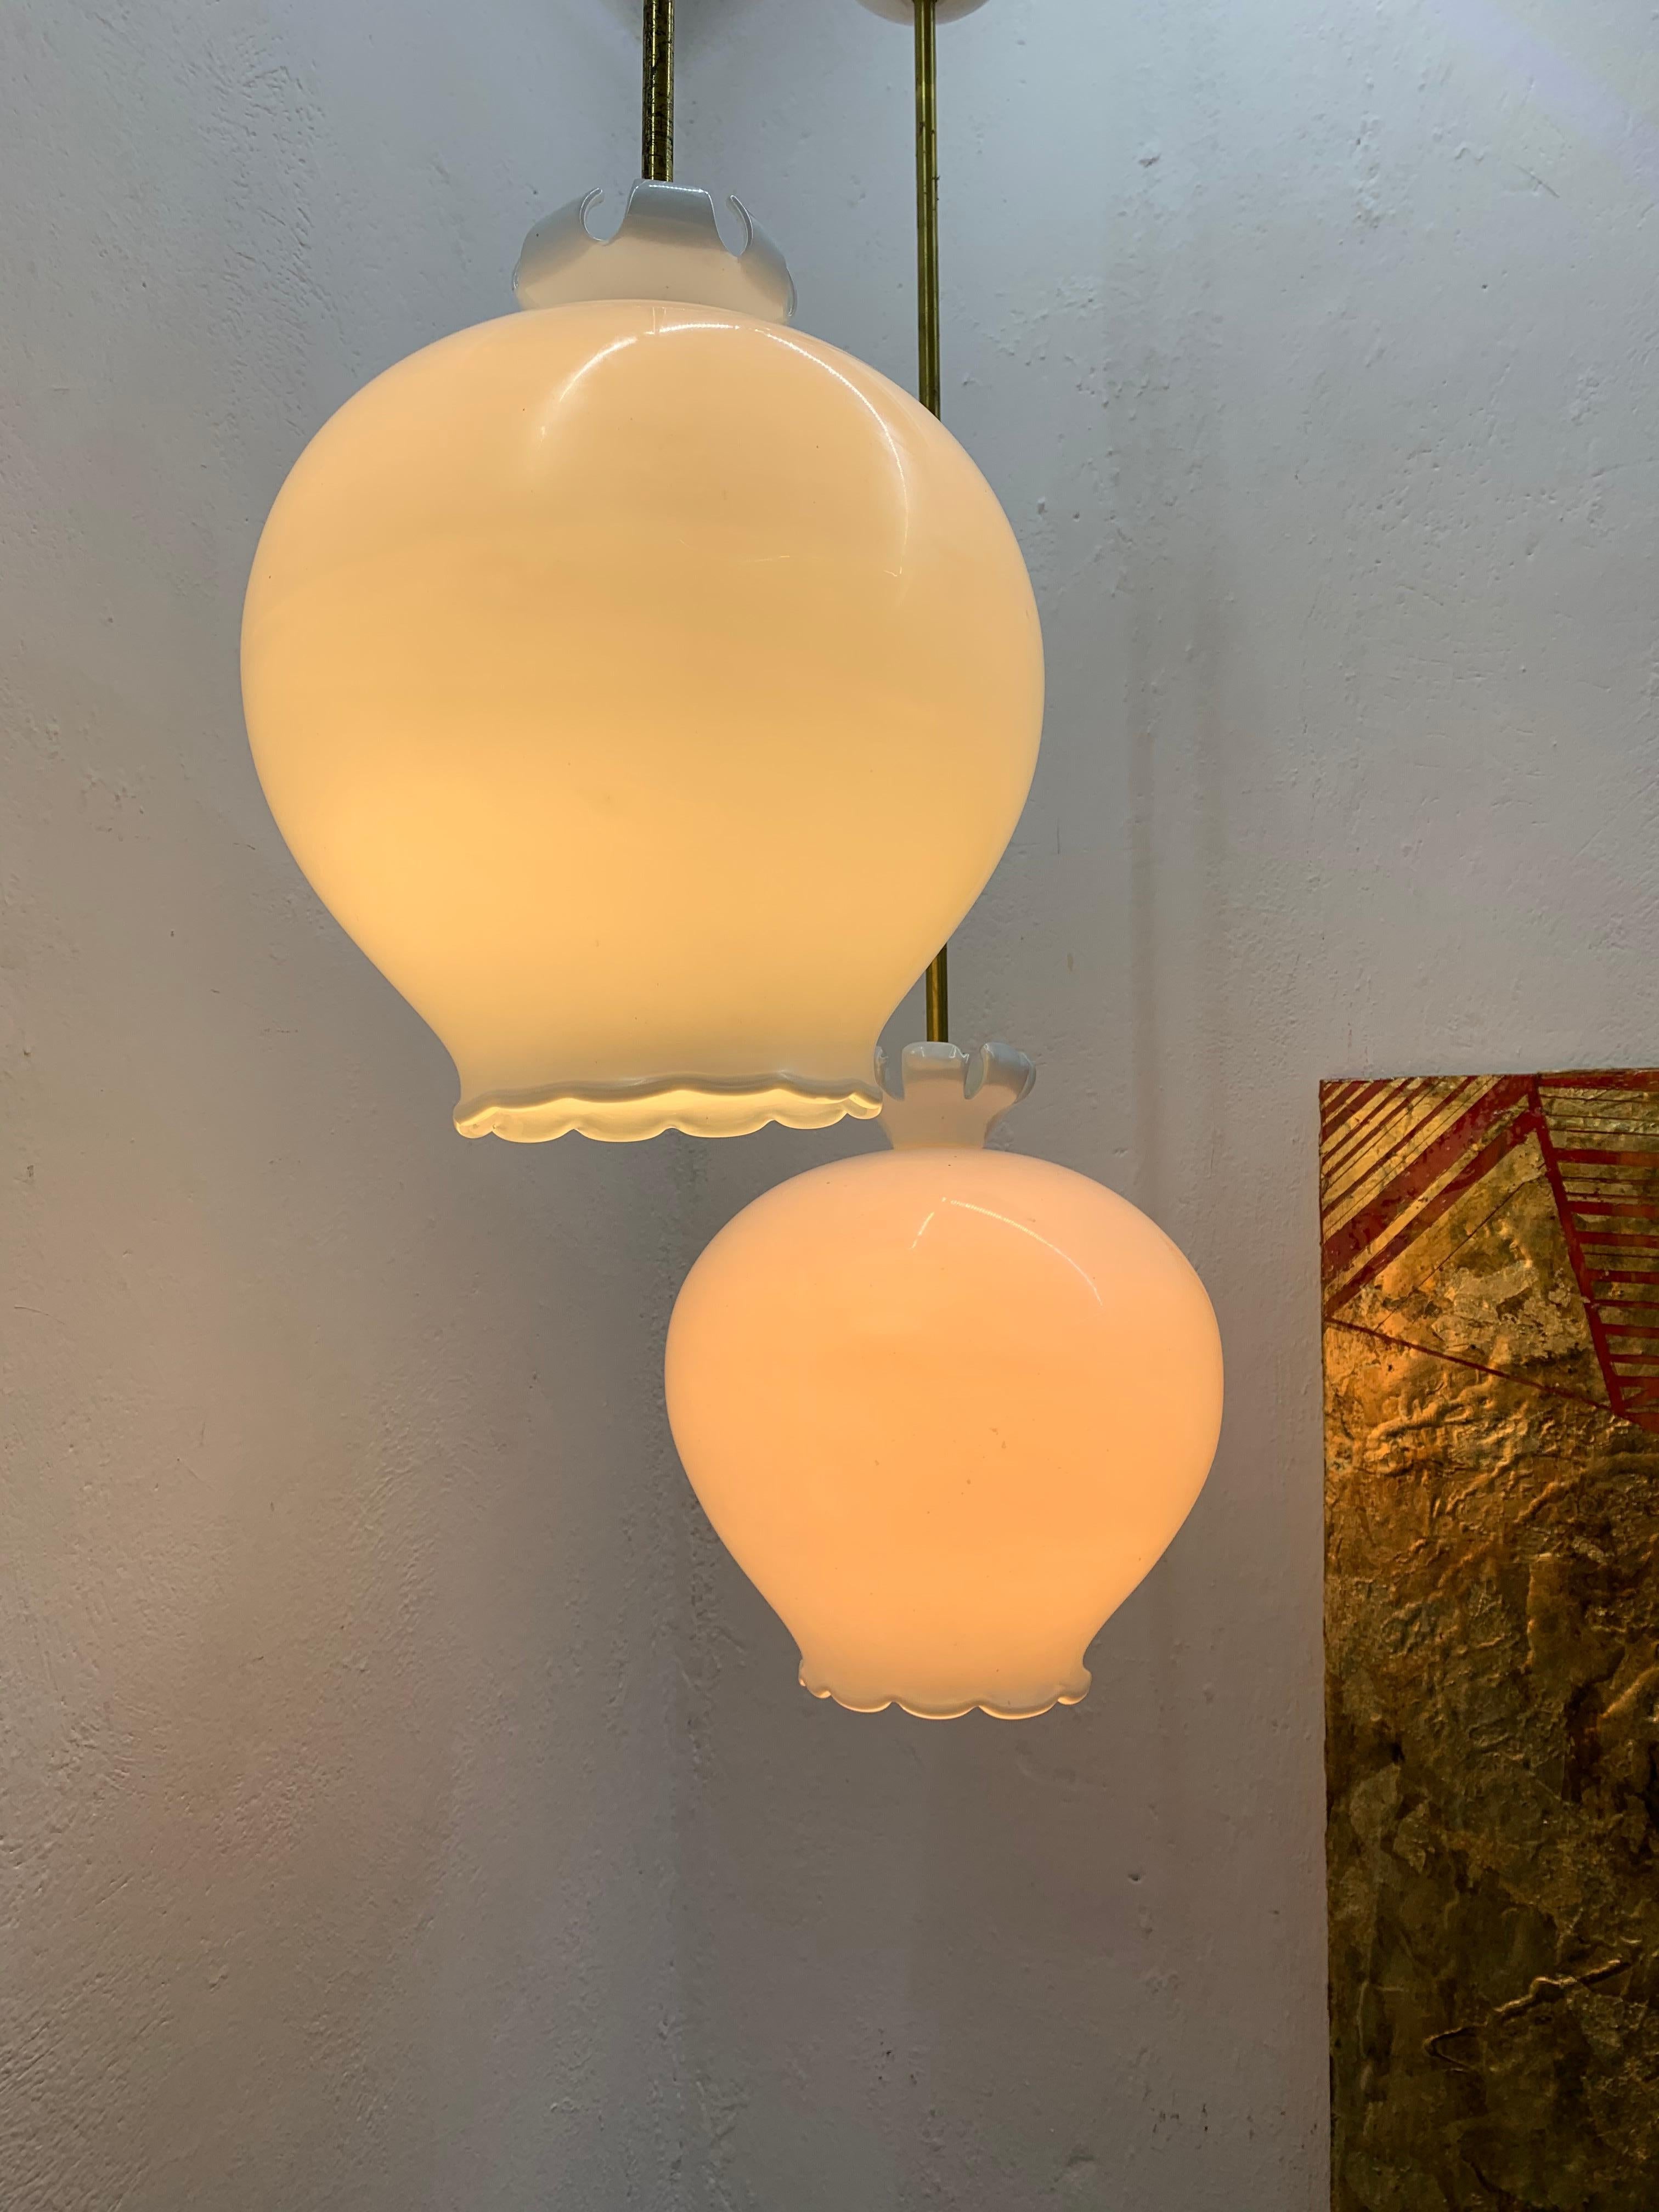 Hand-Crafted Mid Century Modern Lanterns by Seguso, in Murano Glass, Italy, circa 1940-50 For Sale